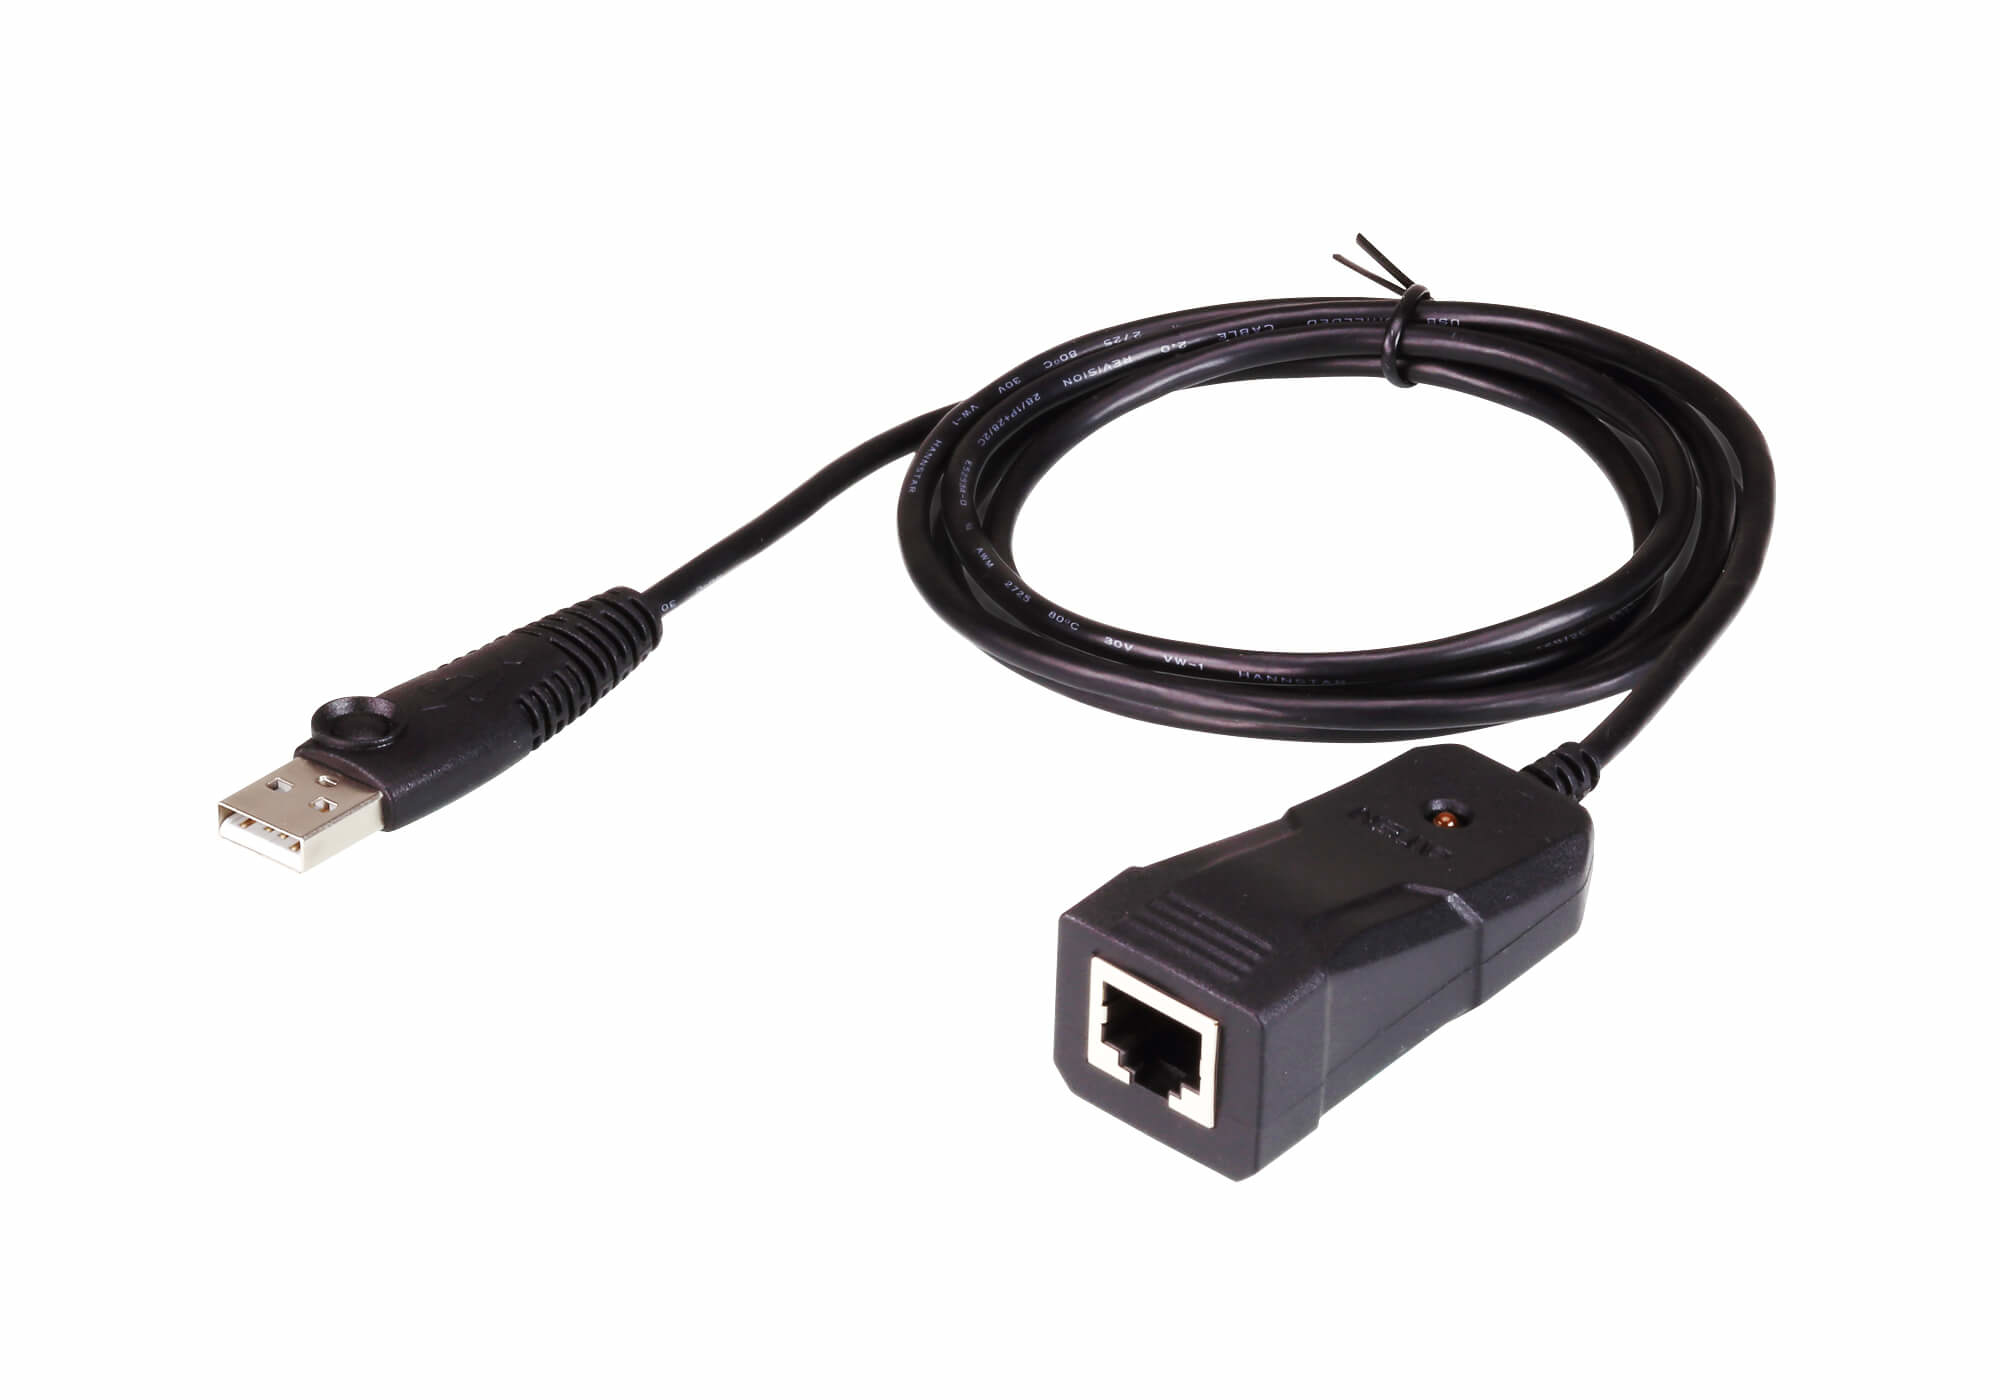 Aten USB to RS-232 (RJ-45  1 2m) Adapter (Cat 5 up to 15m)